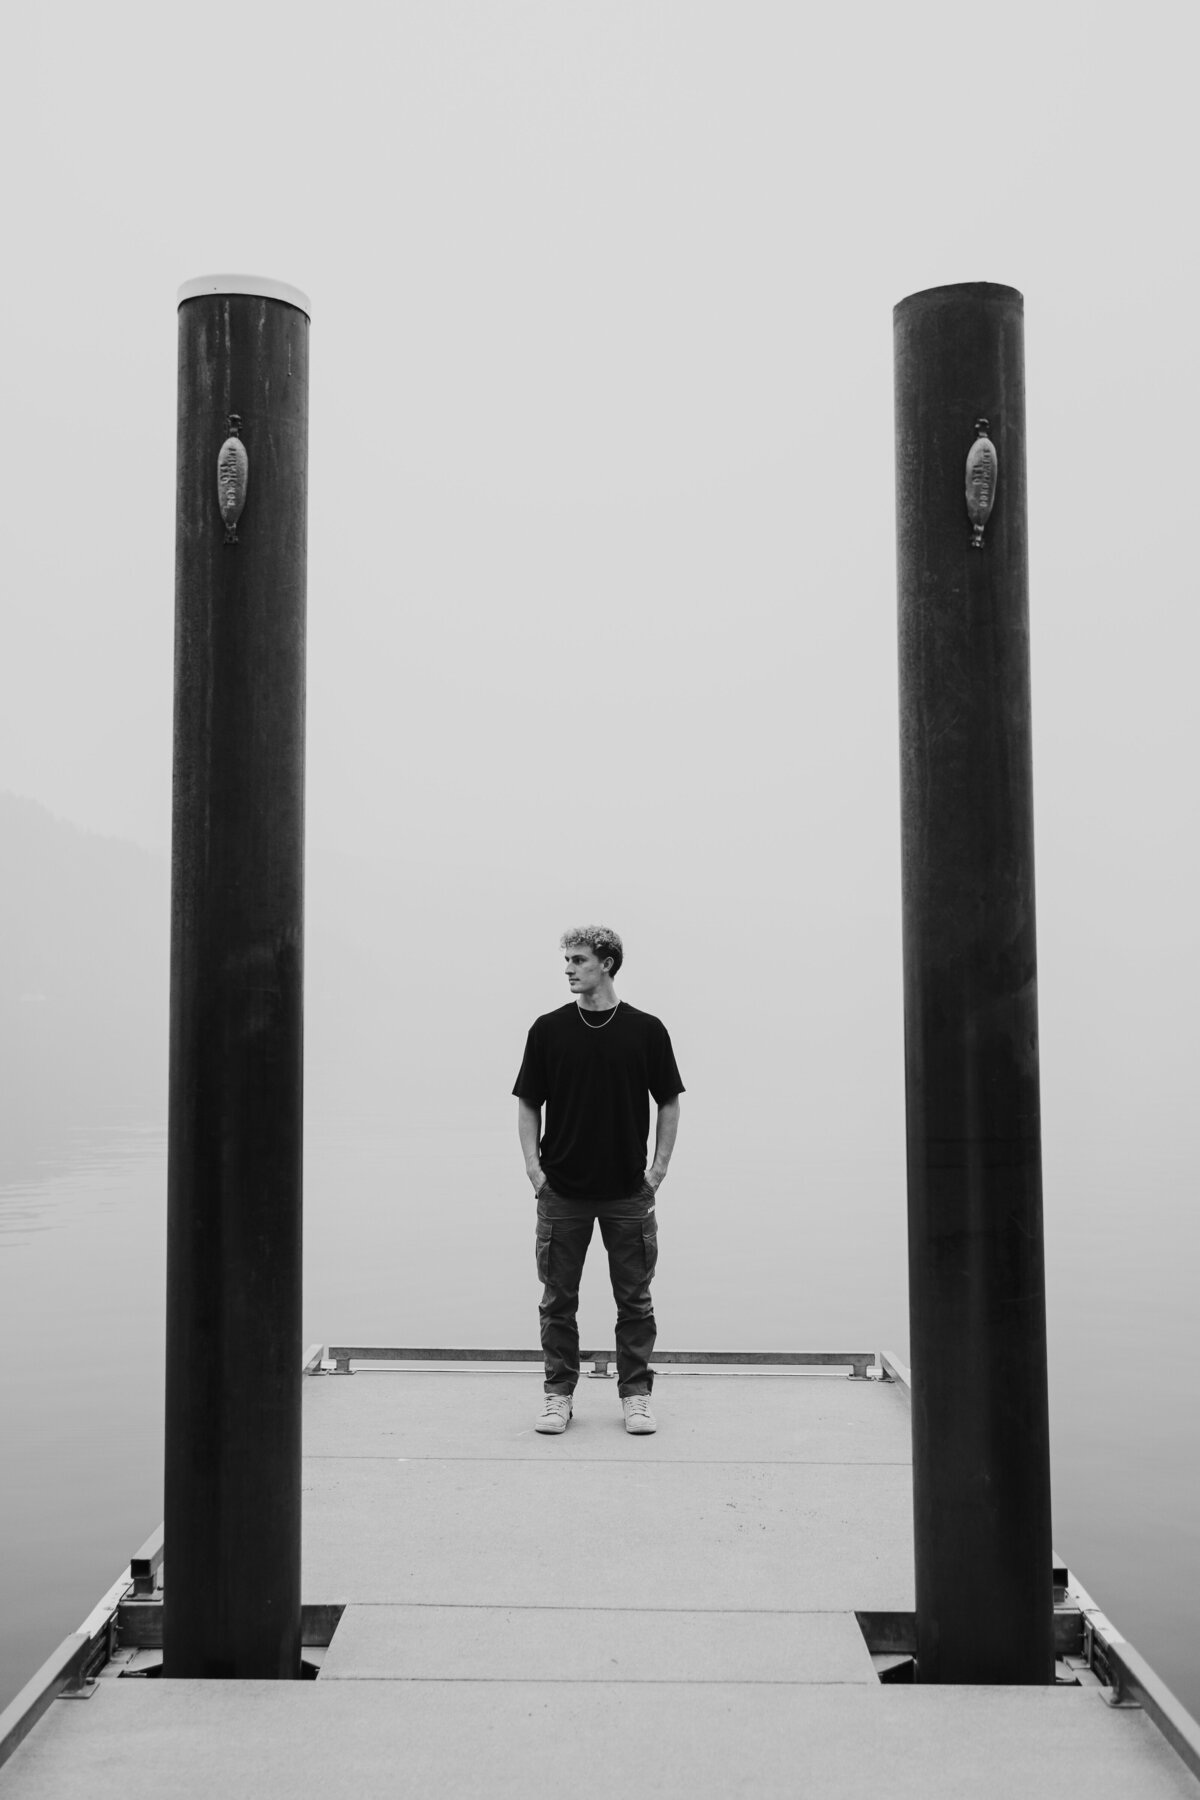 Black and white shot of young man standing at the end of dock with no horizon visible.